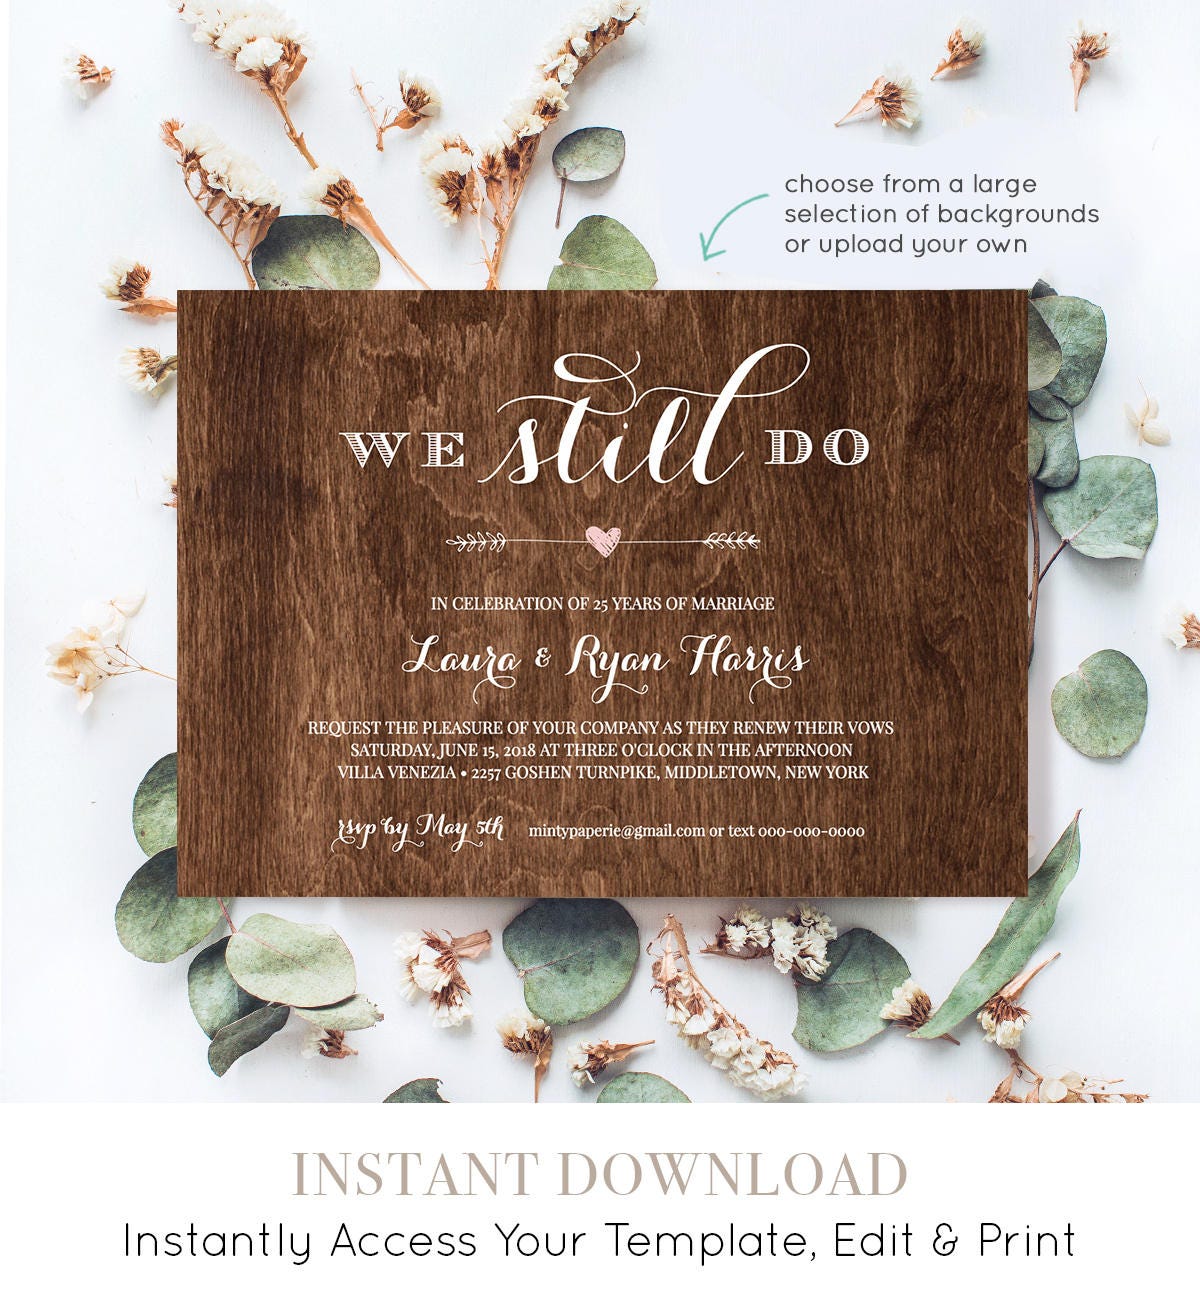 vow-renewal-invitation-template-we-still-do-instant-download-wedding-anniversary-renew-vows